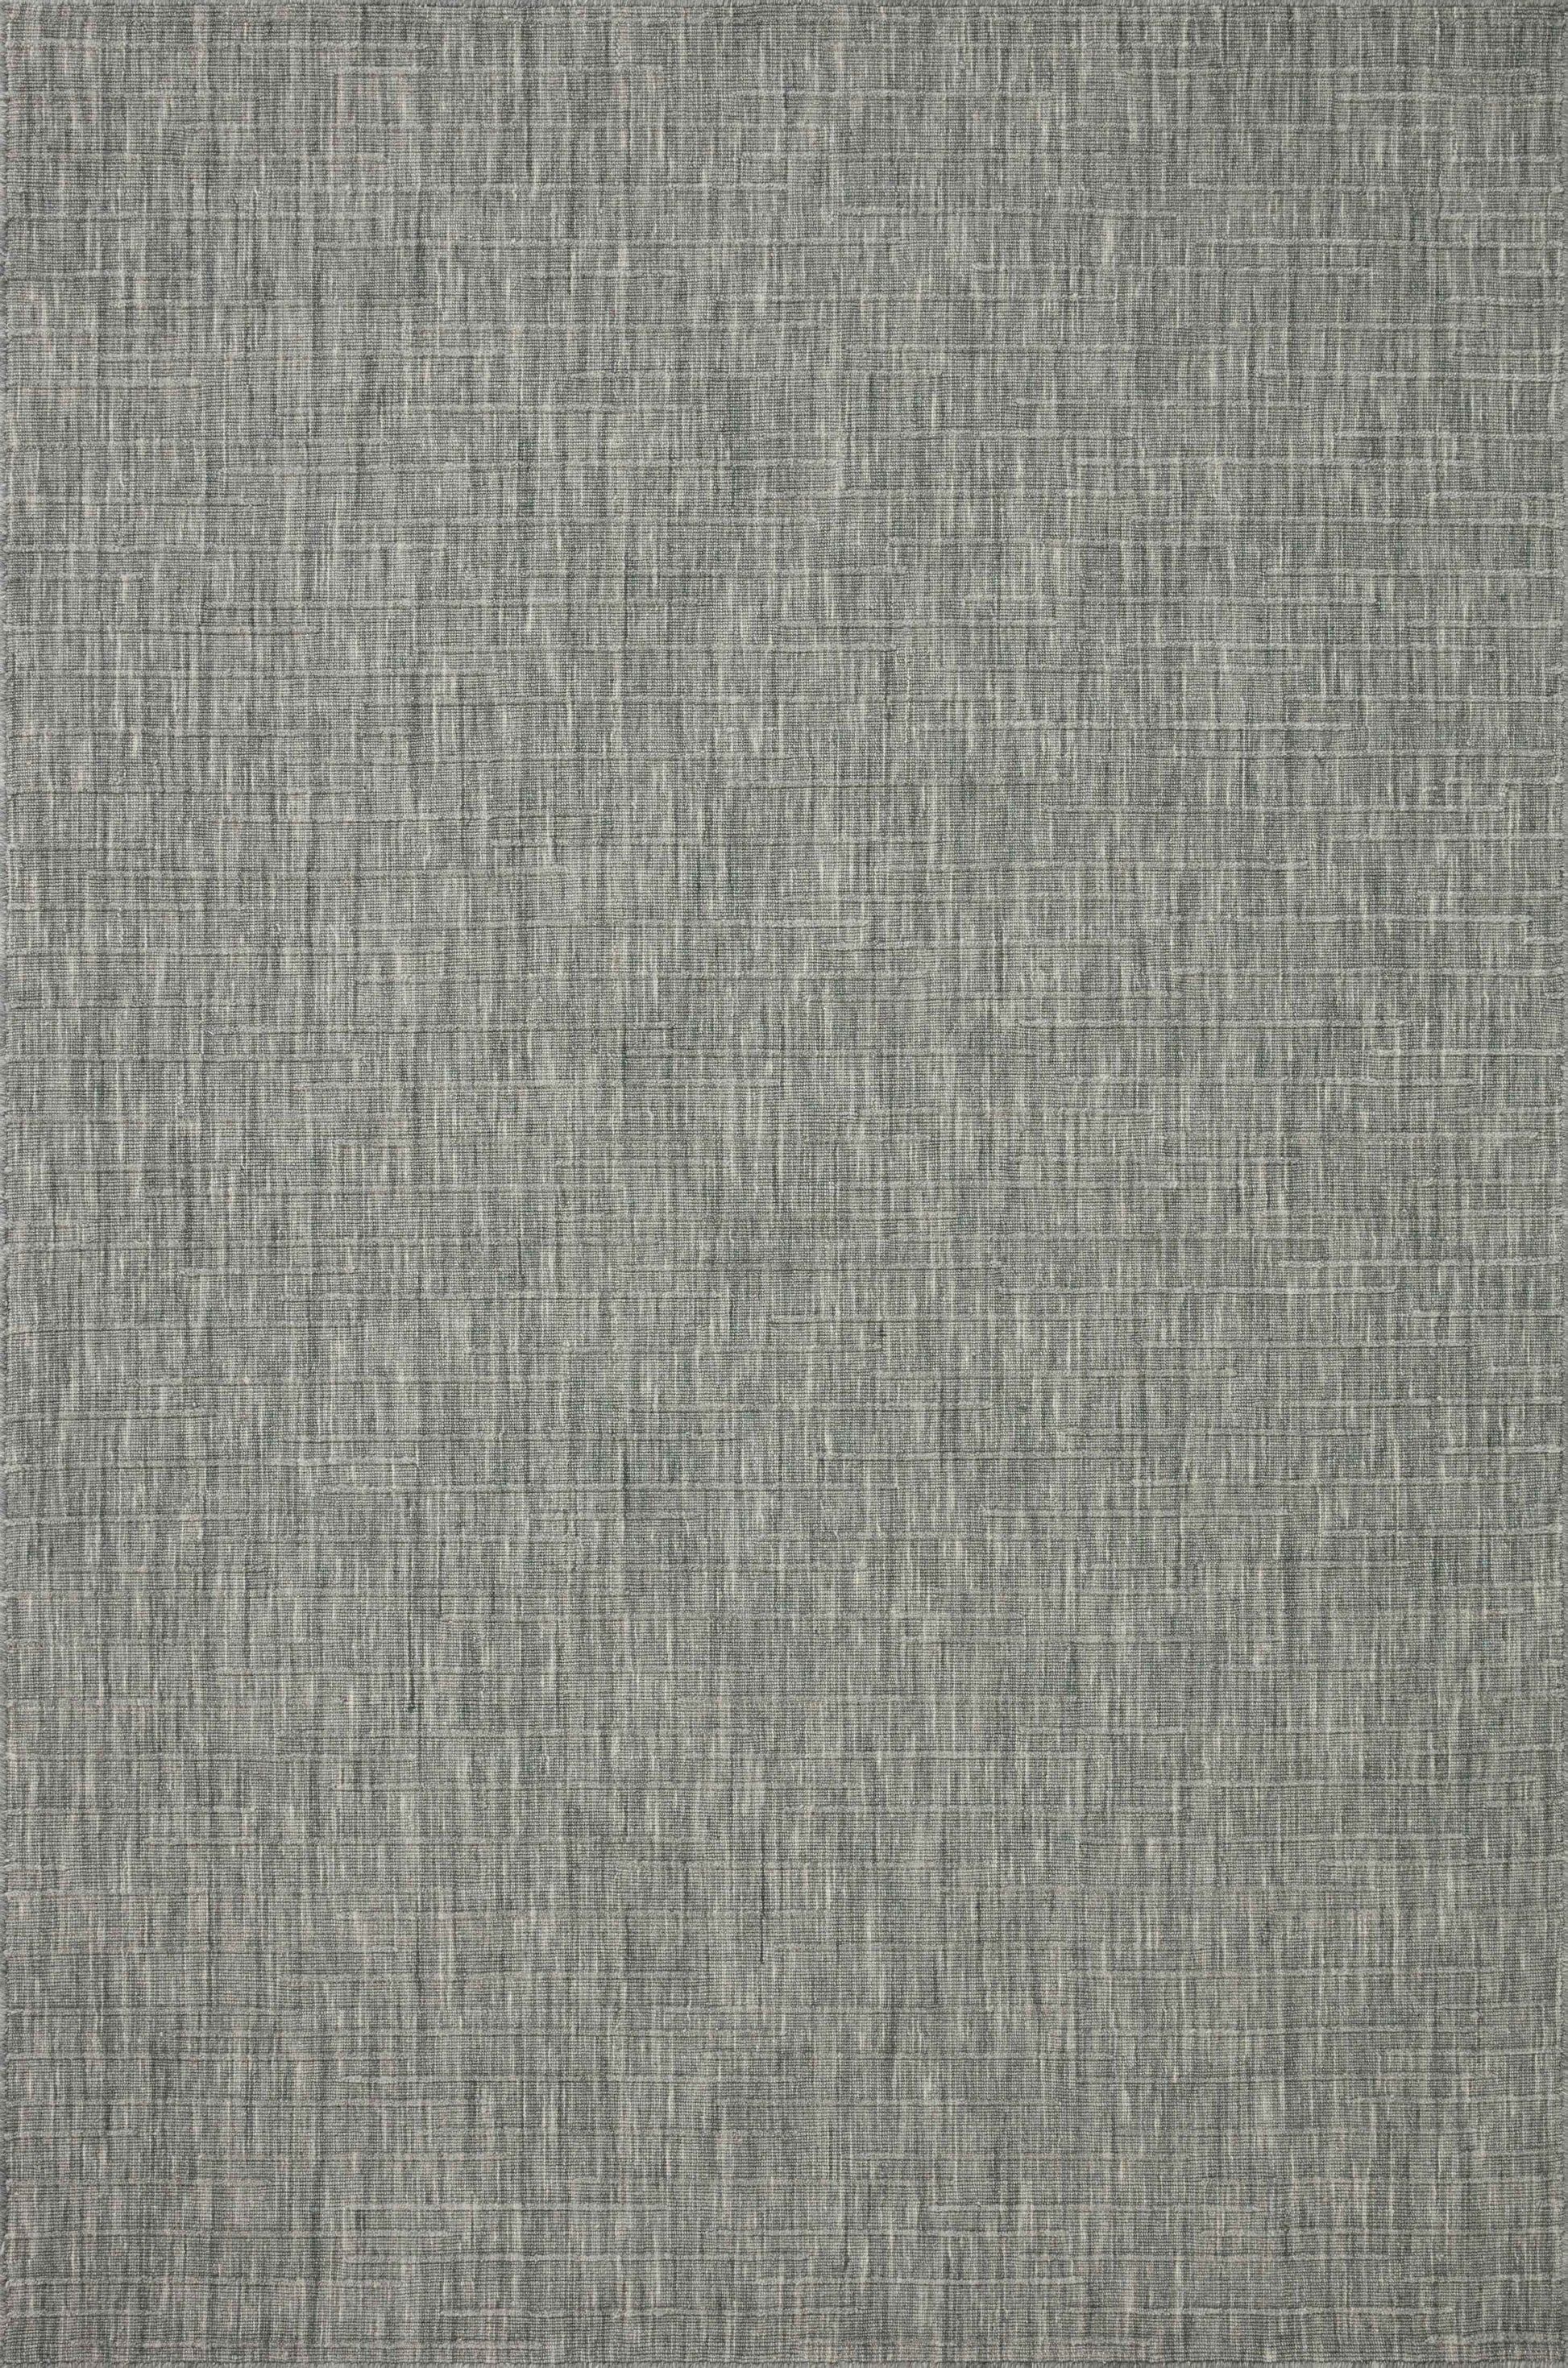 A picture of Loloi's Brooks rug, in style BRO-01, color Grey